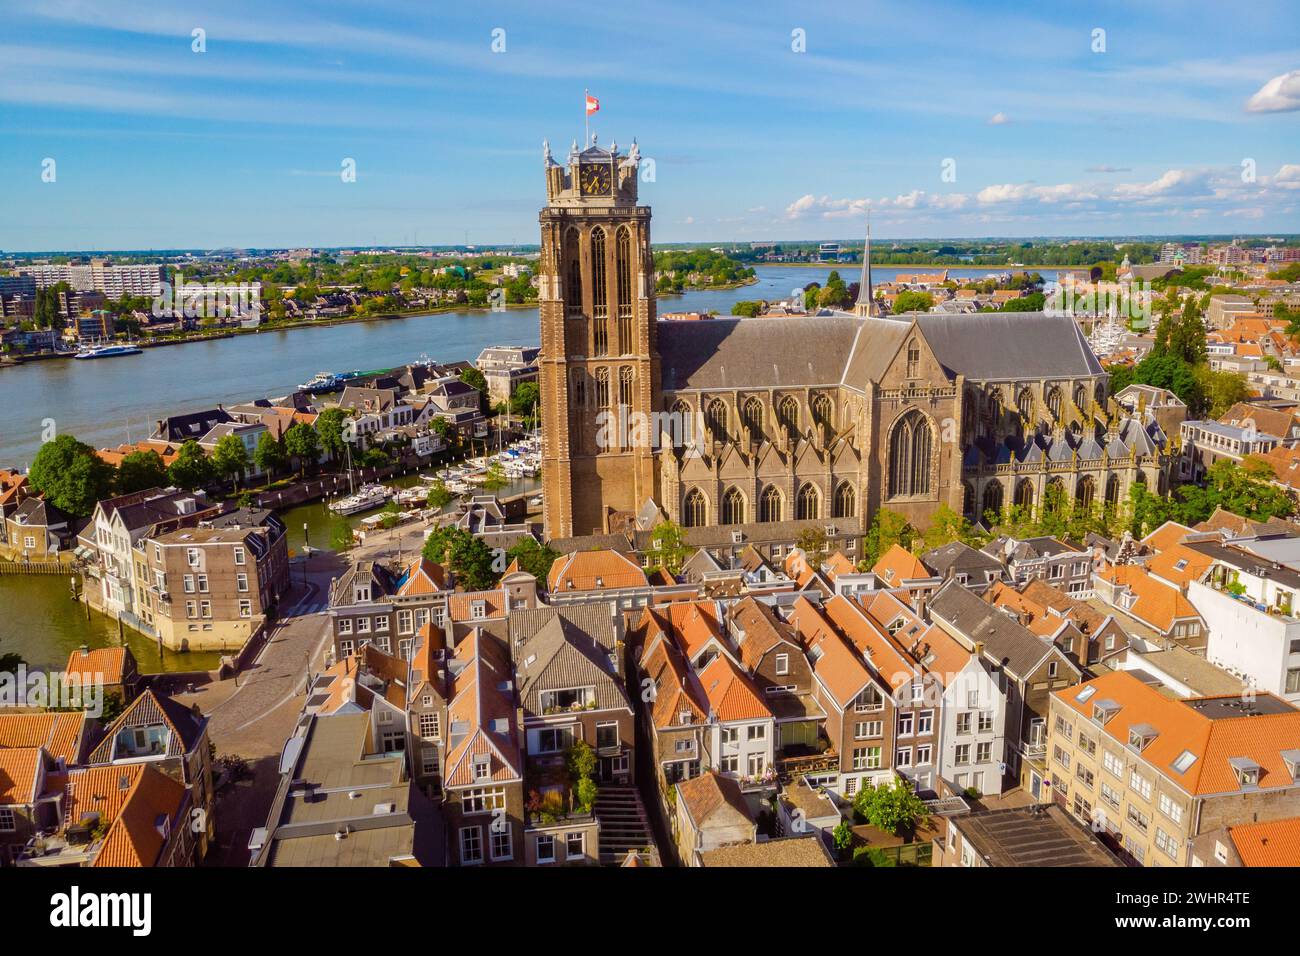 Dordrecht Netherlands, skyline of the old city of Dordrecht with church and canal buildings Stock Photo